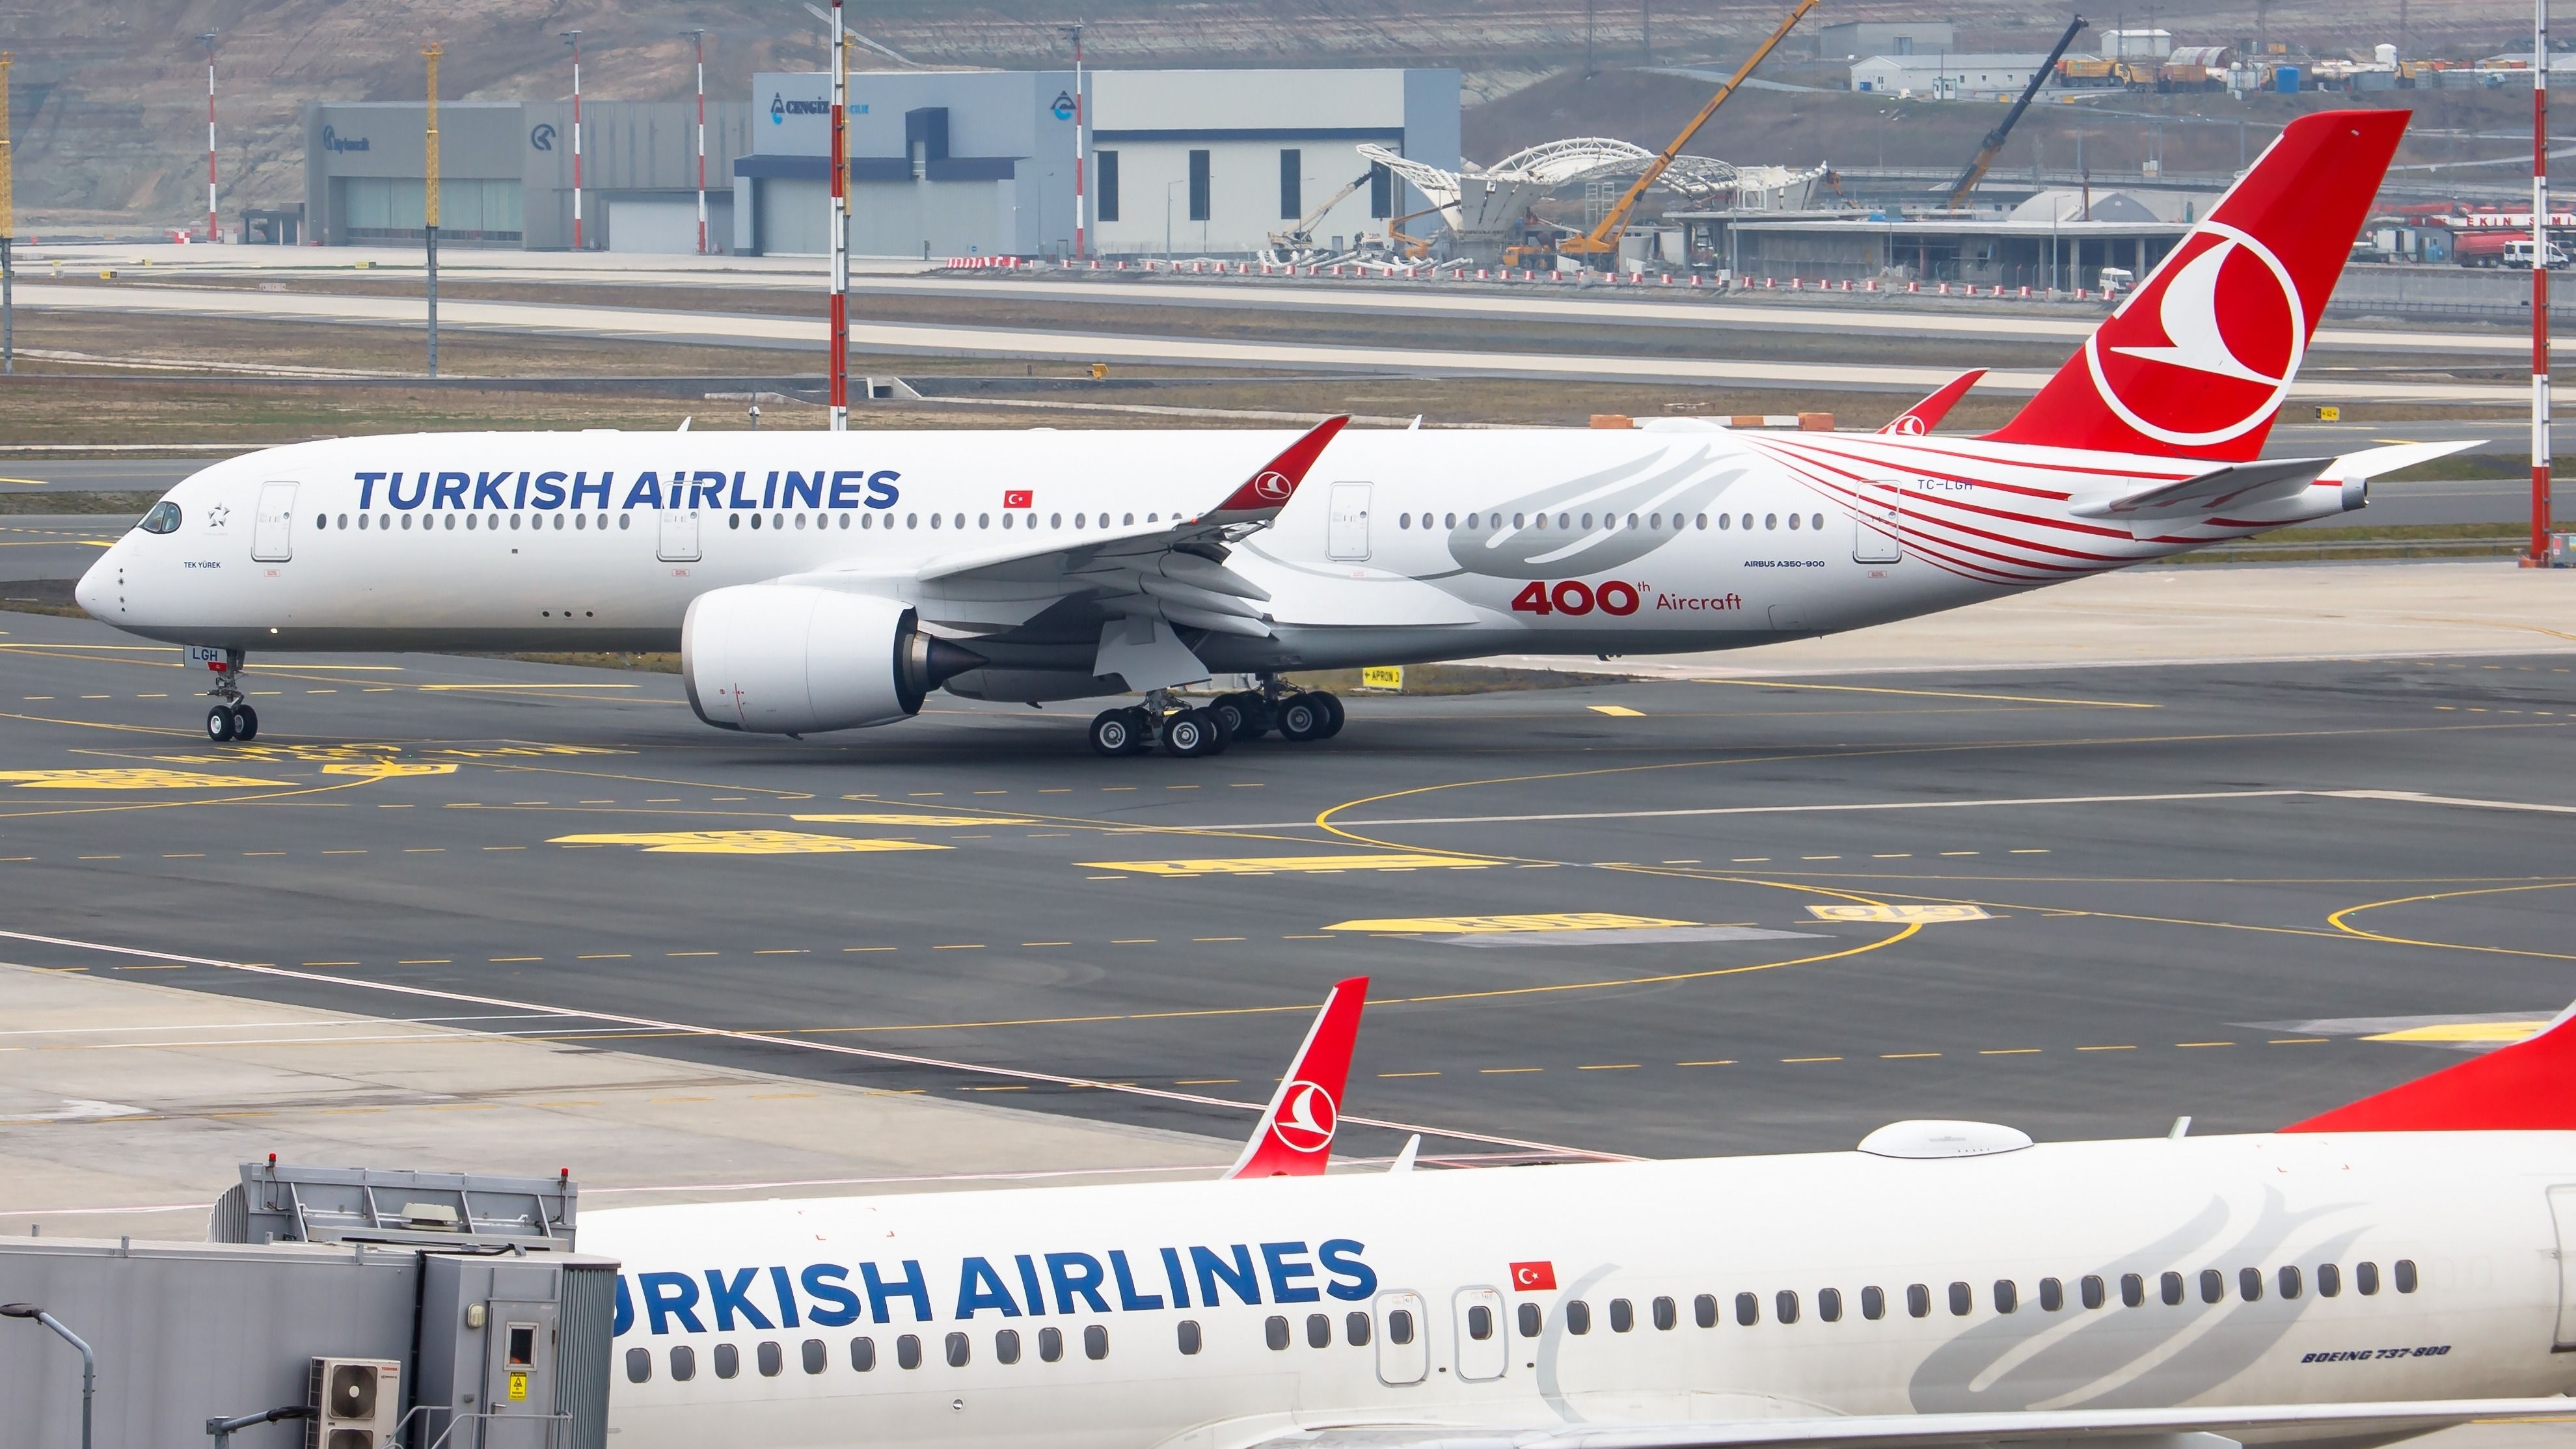 Turkish Airlines A350 aircraft